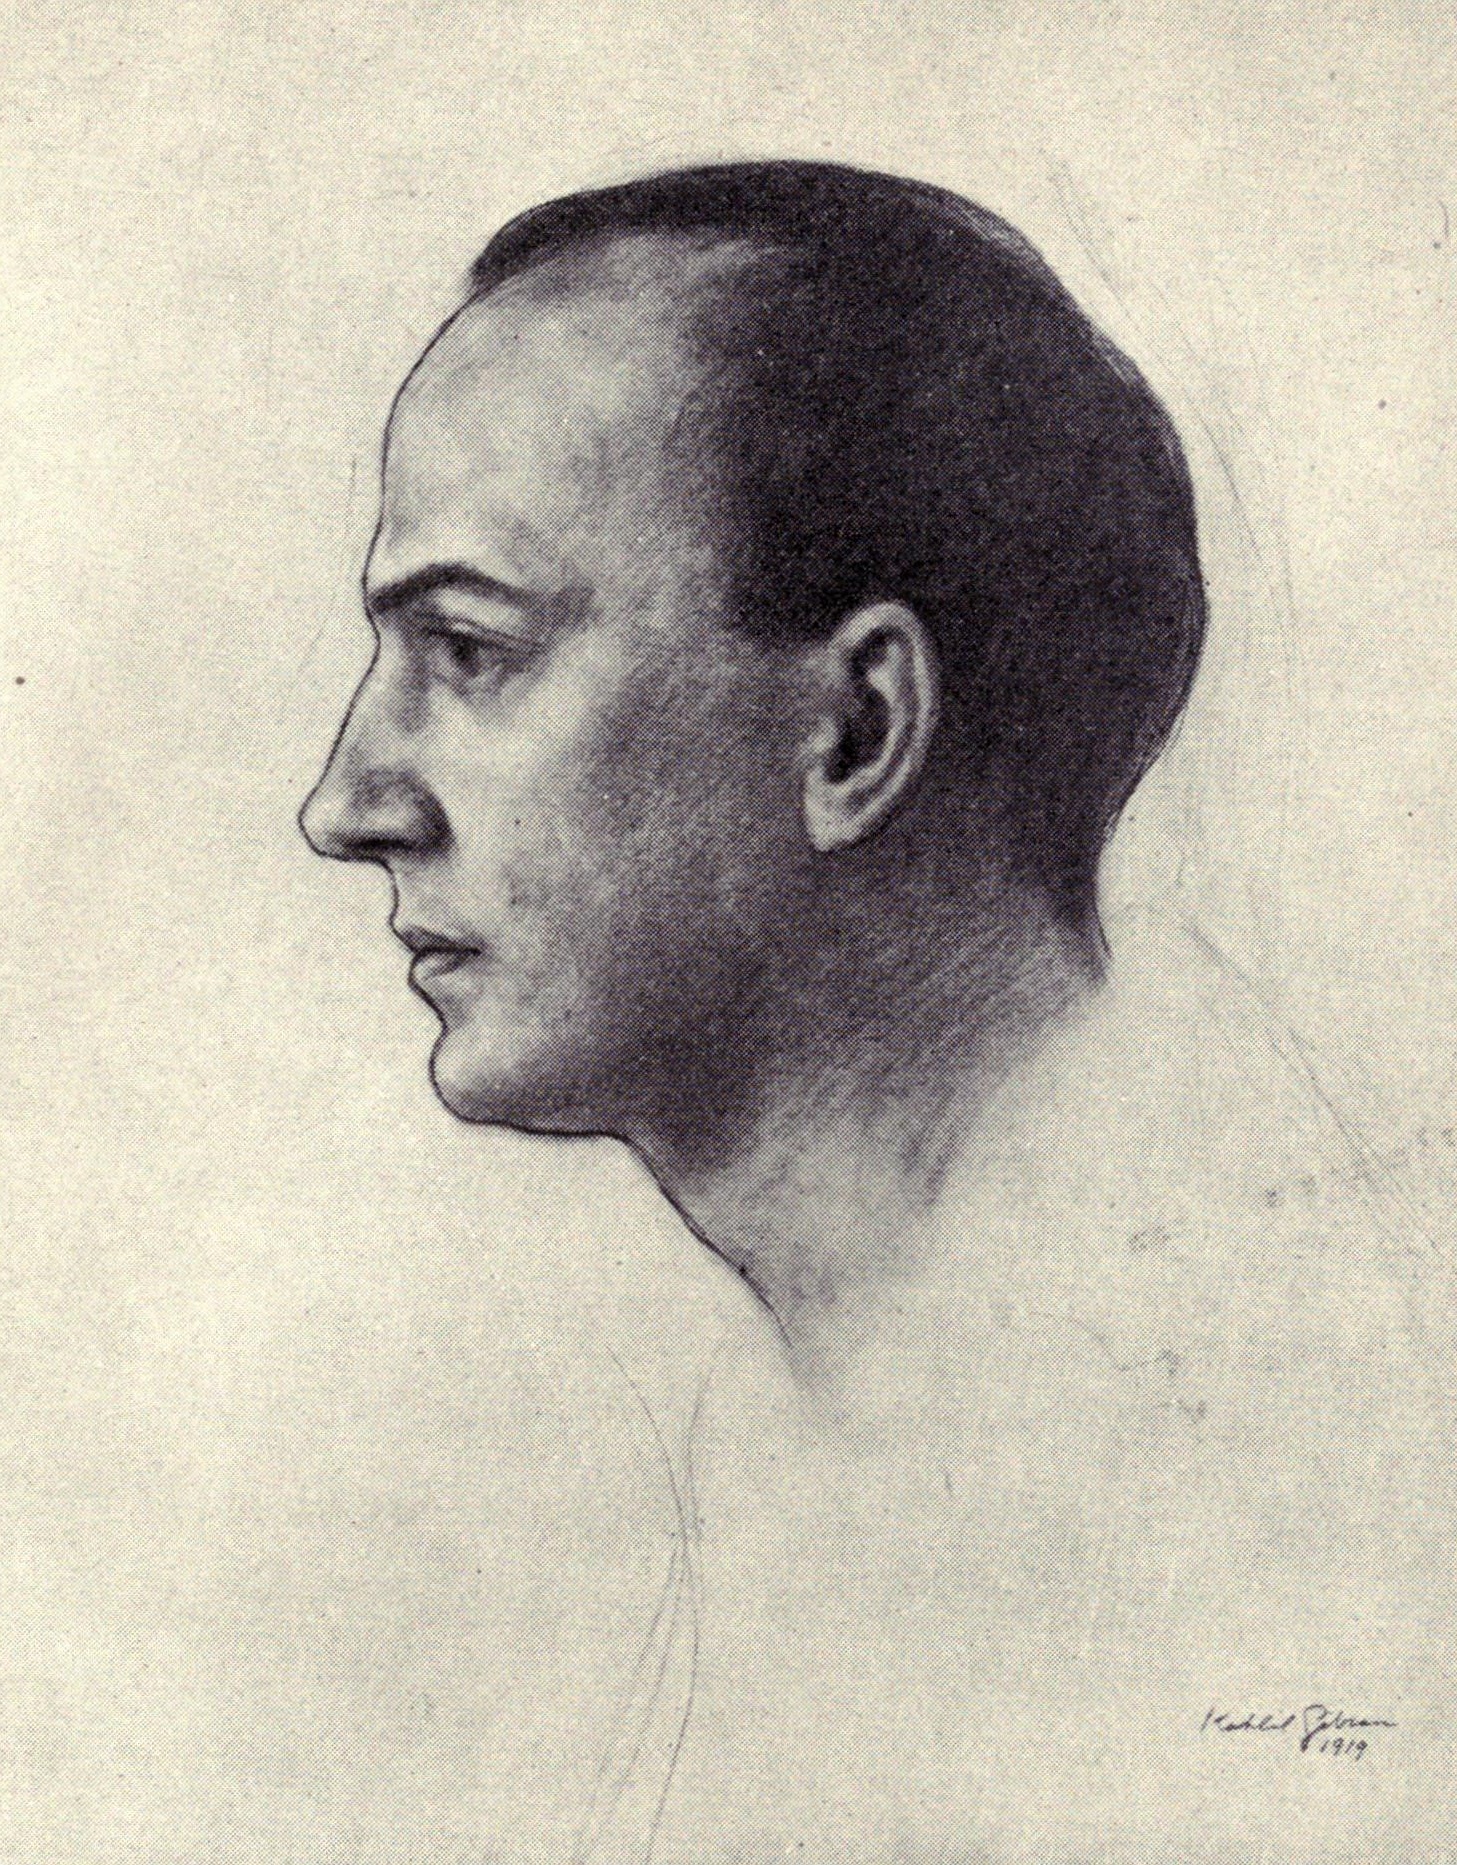 Witter Bynner, The New World, New York: Knopf, 1922 [Frontispiece portrait of the Author by Kahlil Gibran, 1919].